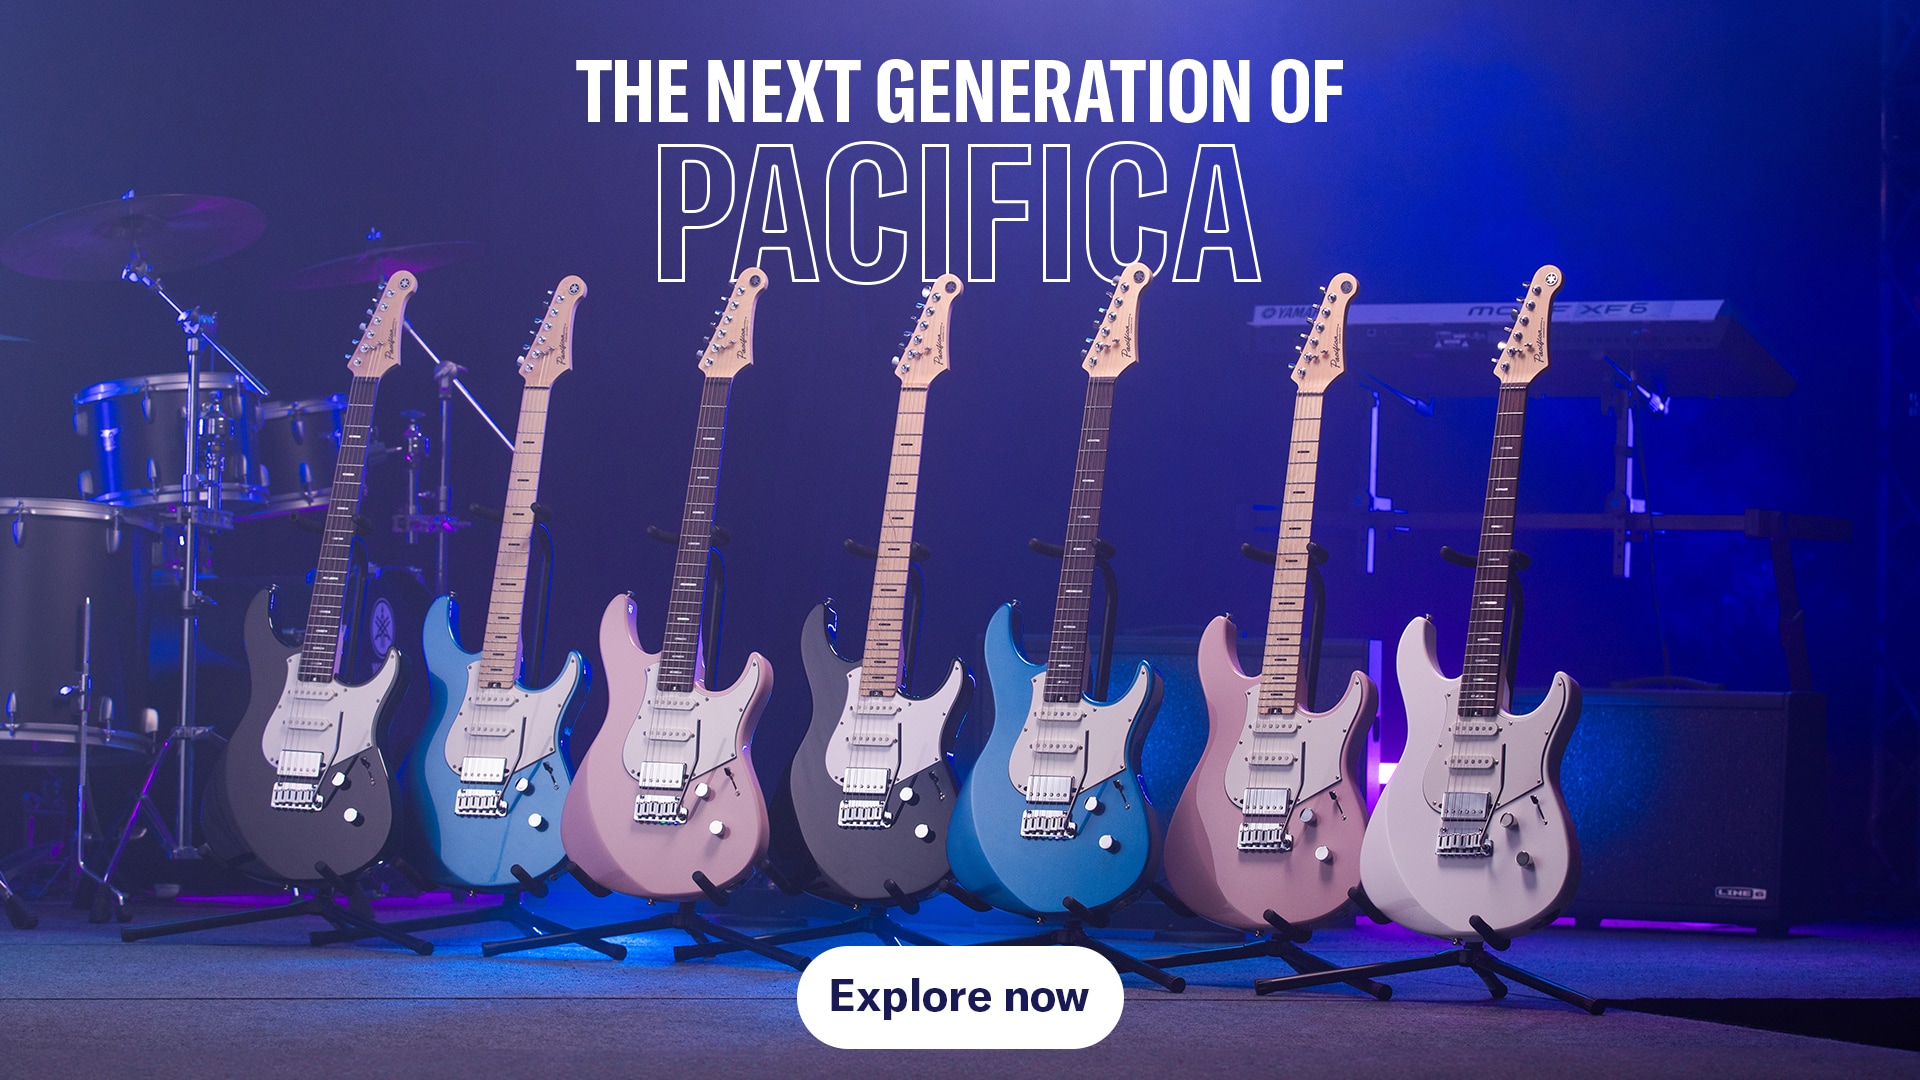 banner image showing yamaha pacifica guitars in different colors